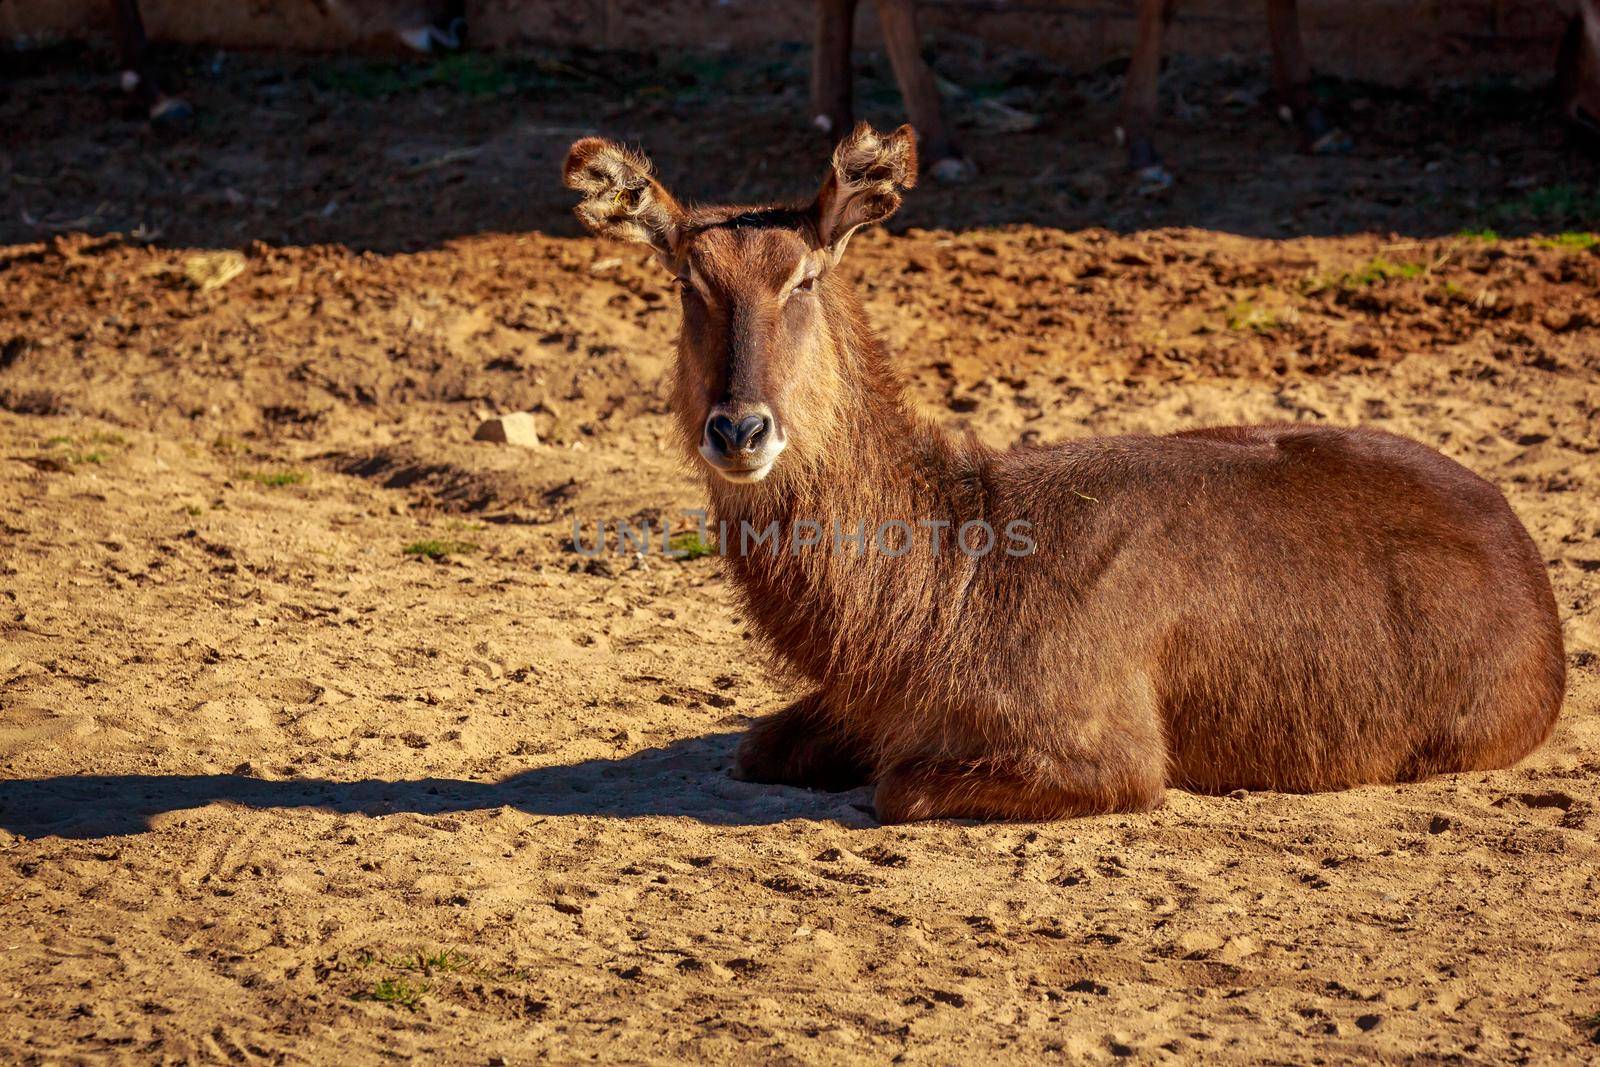 Female Waterbuck rest on the ground